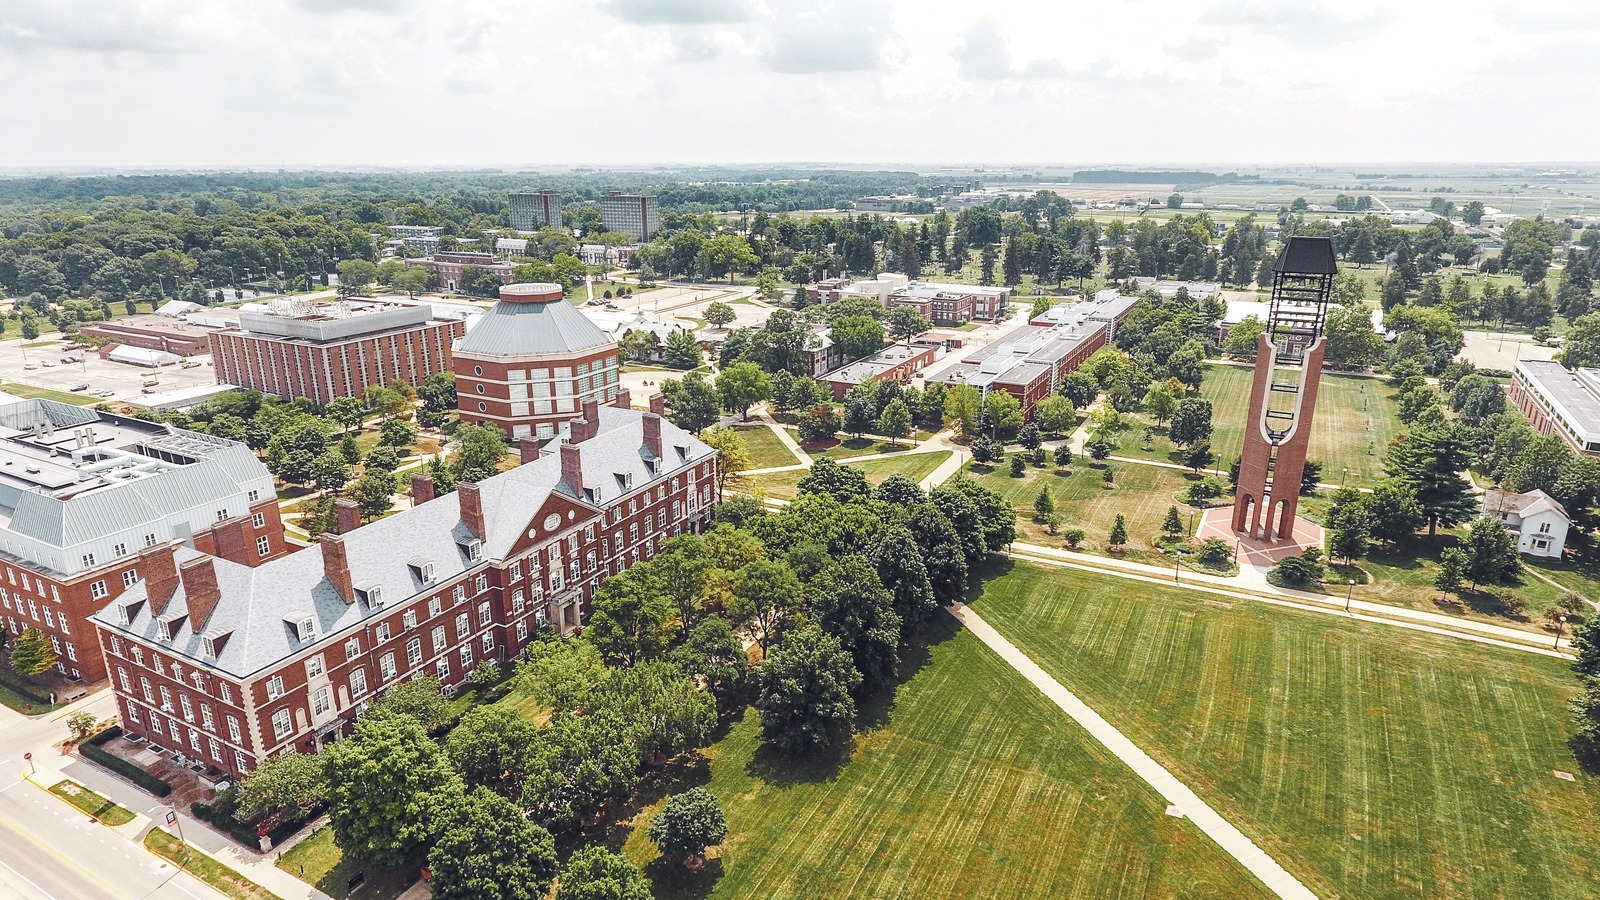 A bird's eye view of the College of ACES at the University of Illinois. The grass is green and the tress are lush.